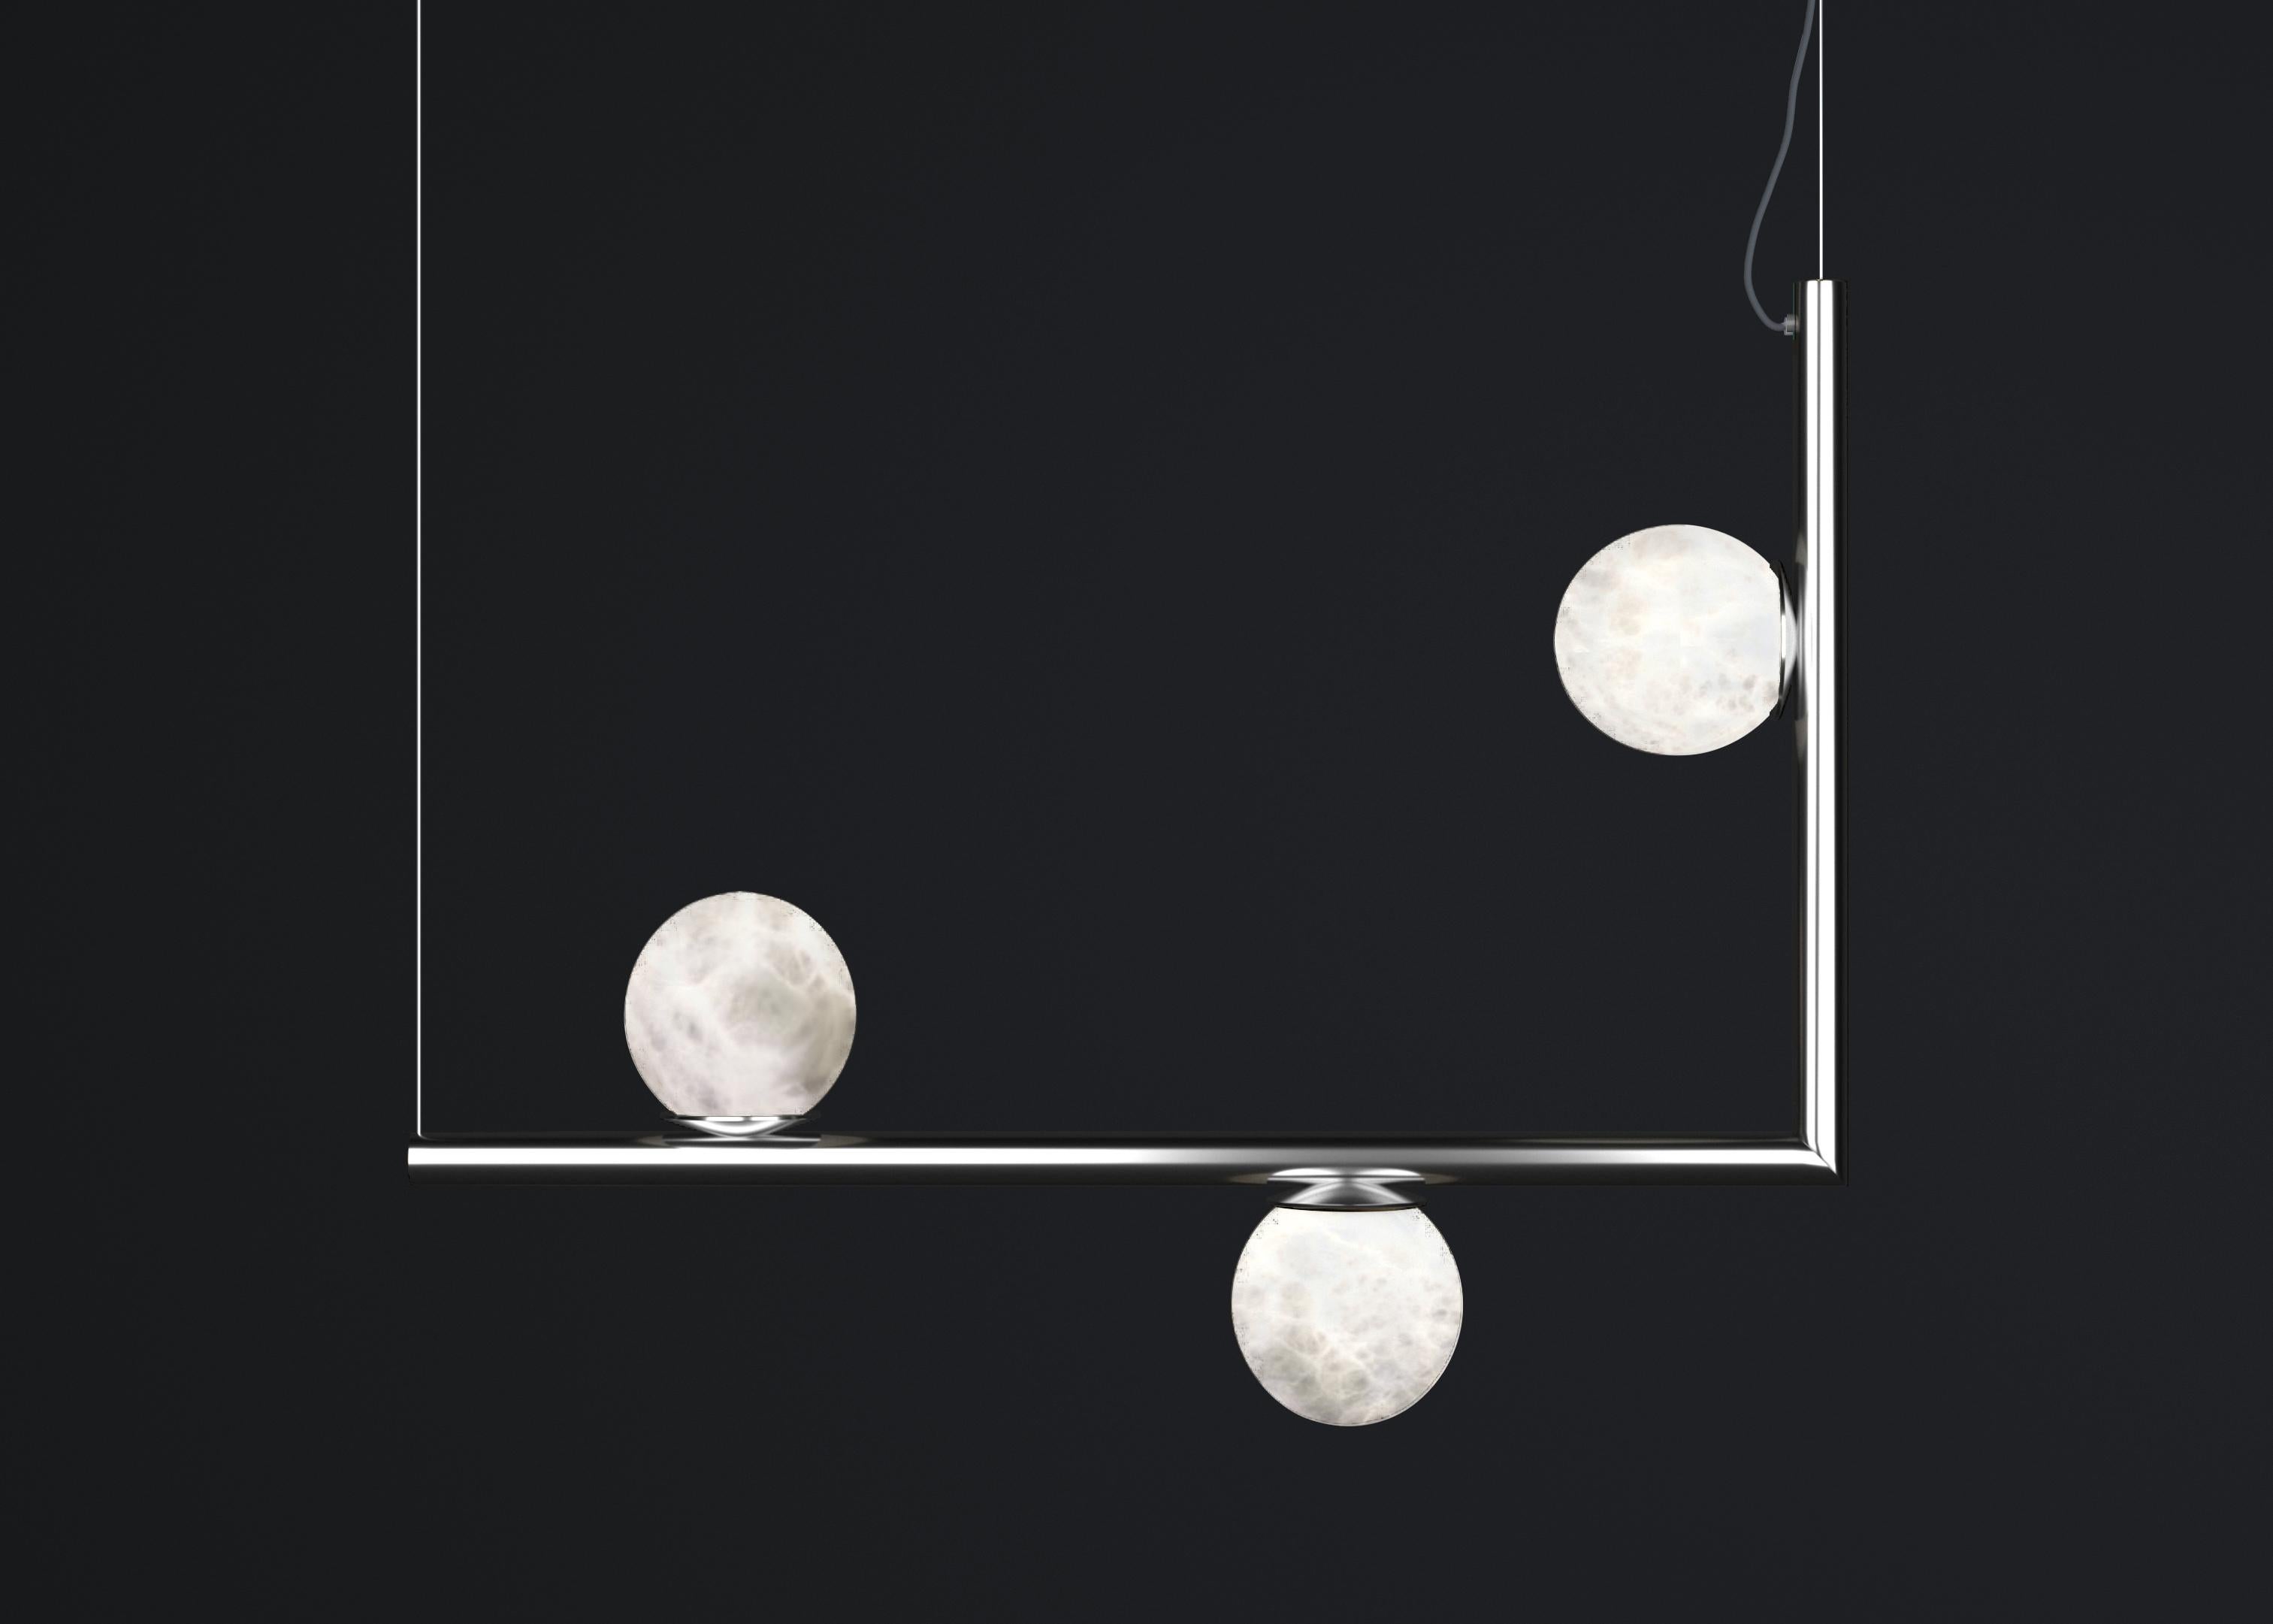 Ofione 1 Shiny Silver Metal Pendant Lamp by Alabastro Italiano
Dimensions: D 15 x W 85 x H 64 cm.
Materials: White alabaster and metal.

Available in different finishes: Shiny Silver, Bronze, Brushed Brass, Ruggine of Florence, Brushed Burnished,